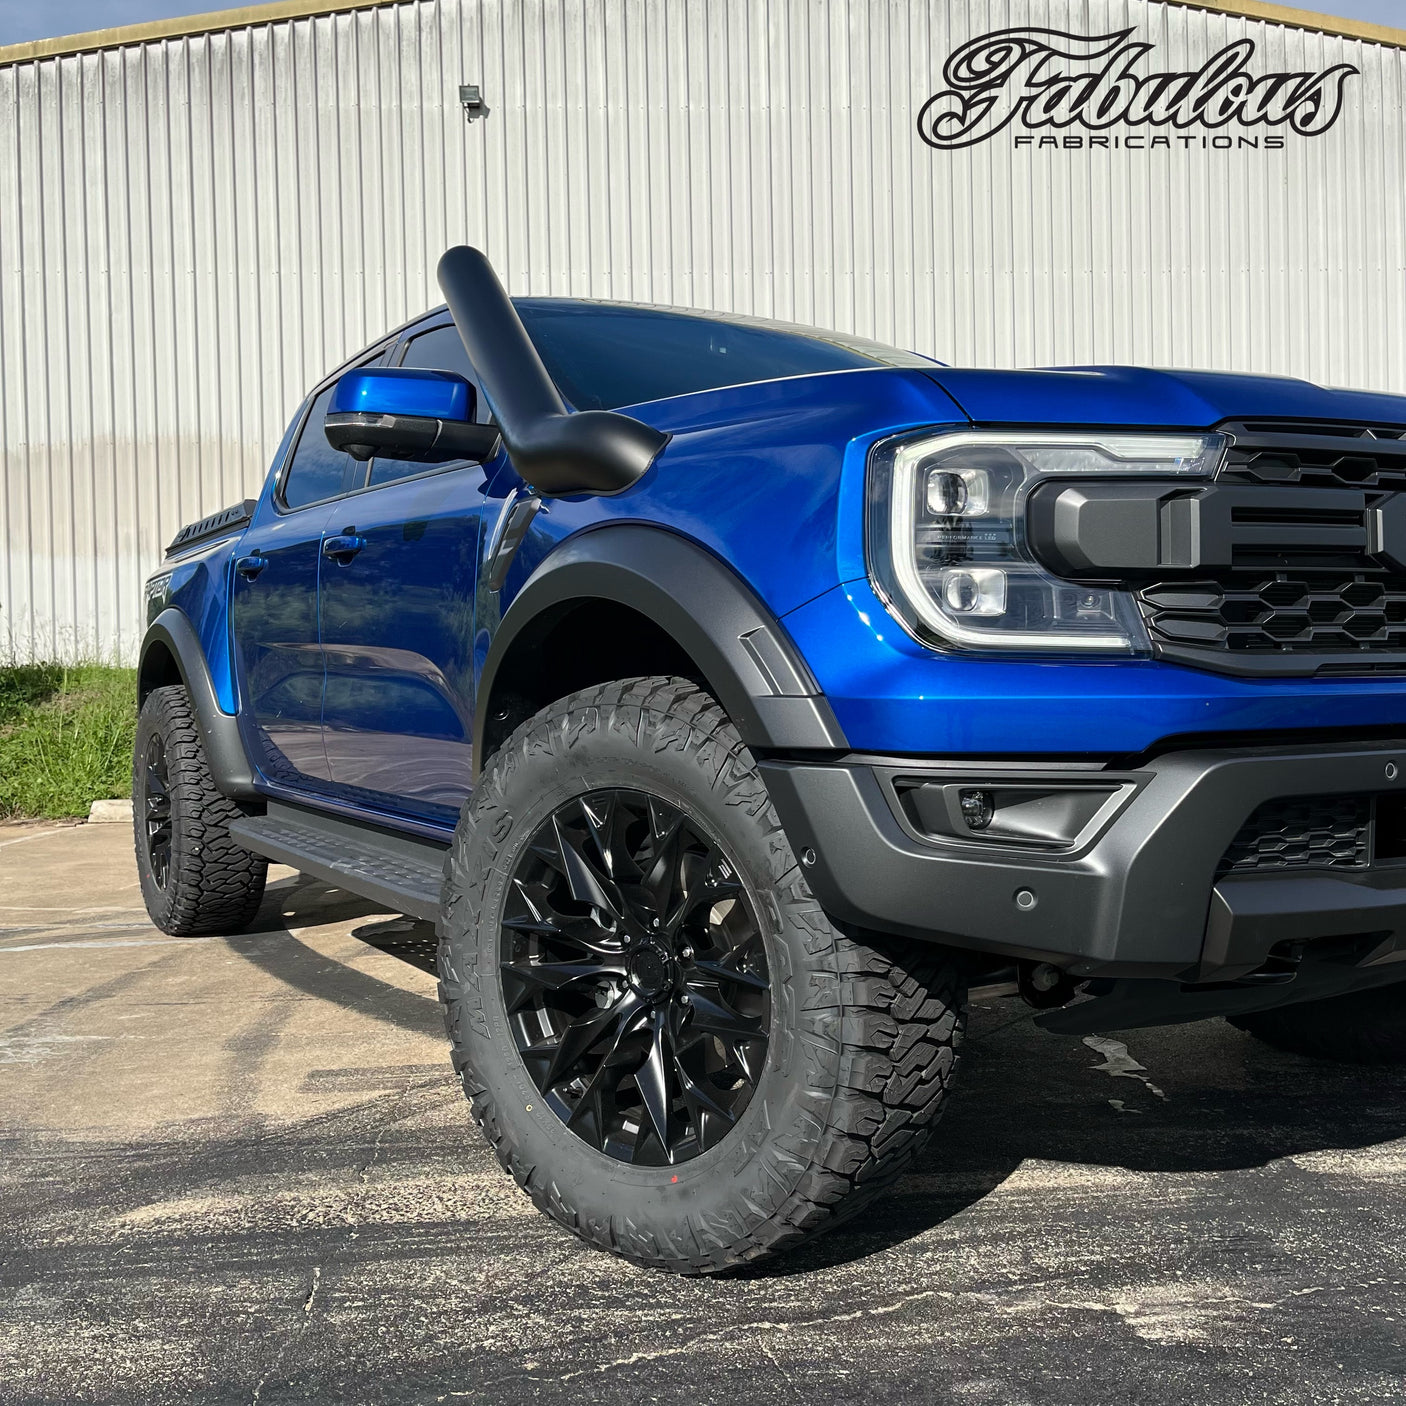 Ford Ranger Raptor Next Gen 5 Inch Stainless Snorkel and Twin Intake Alloy Airbox Kit